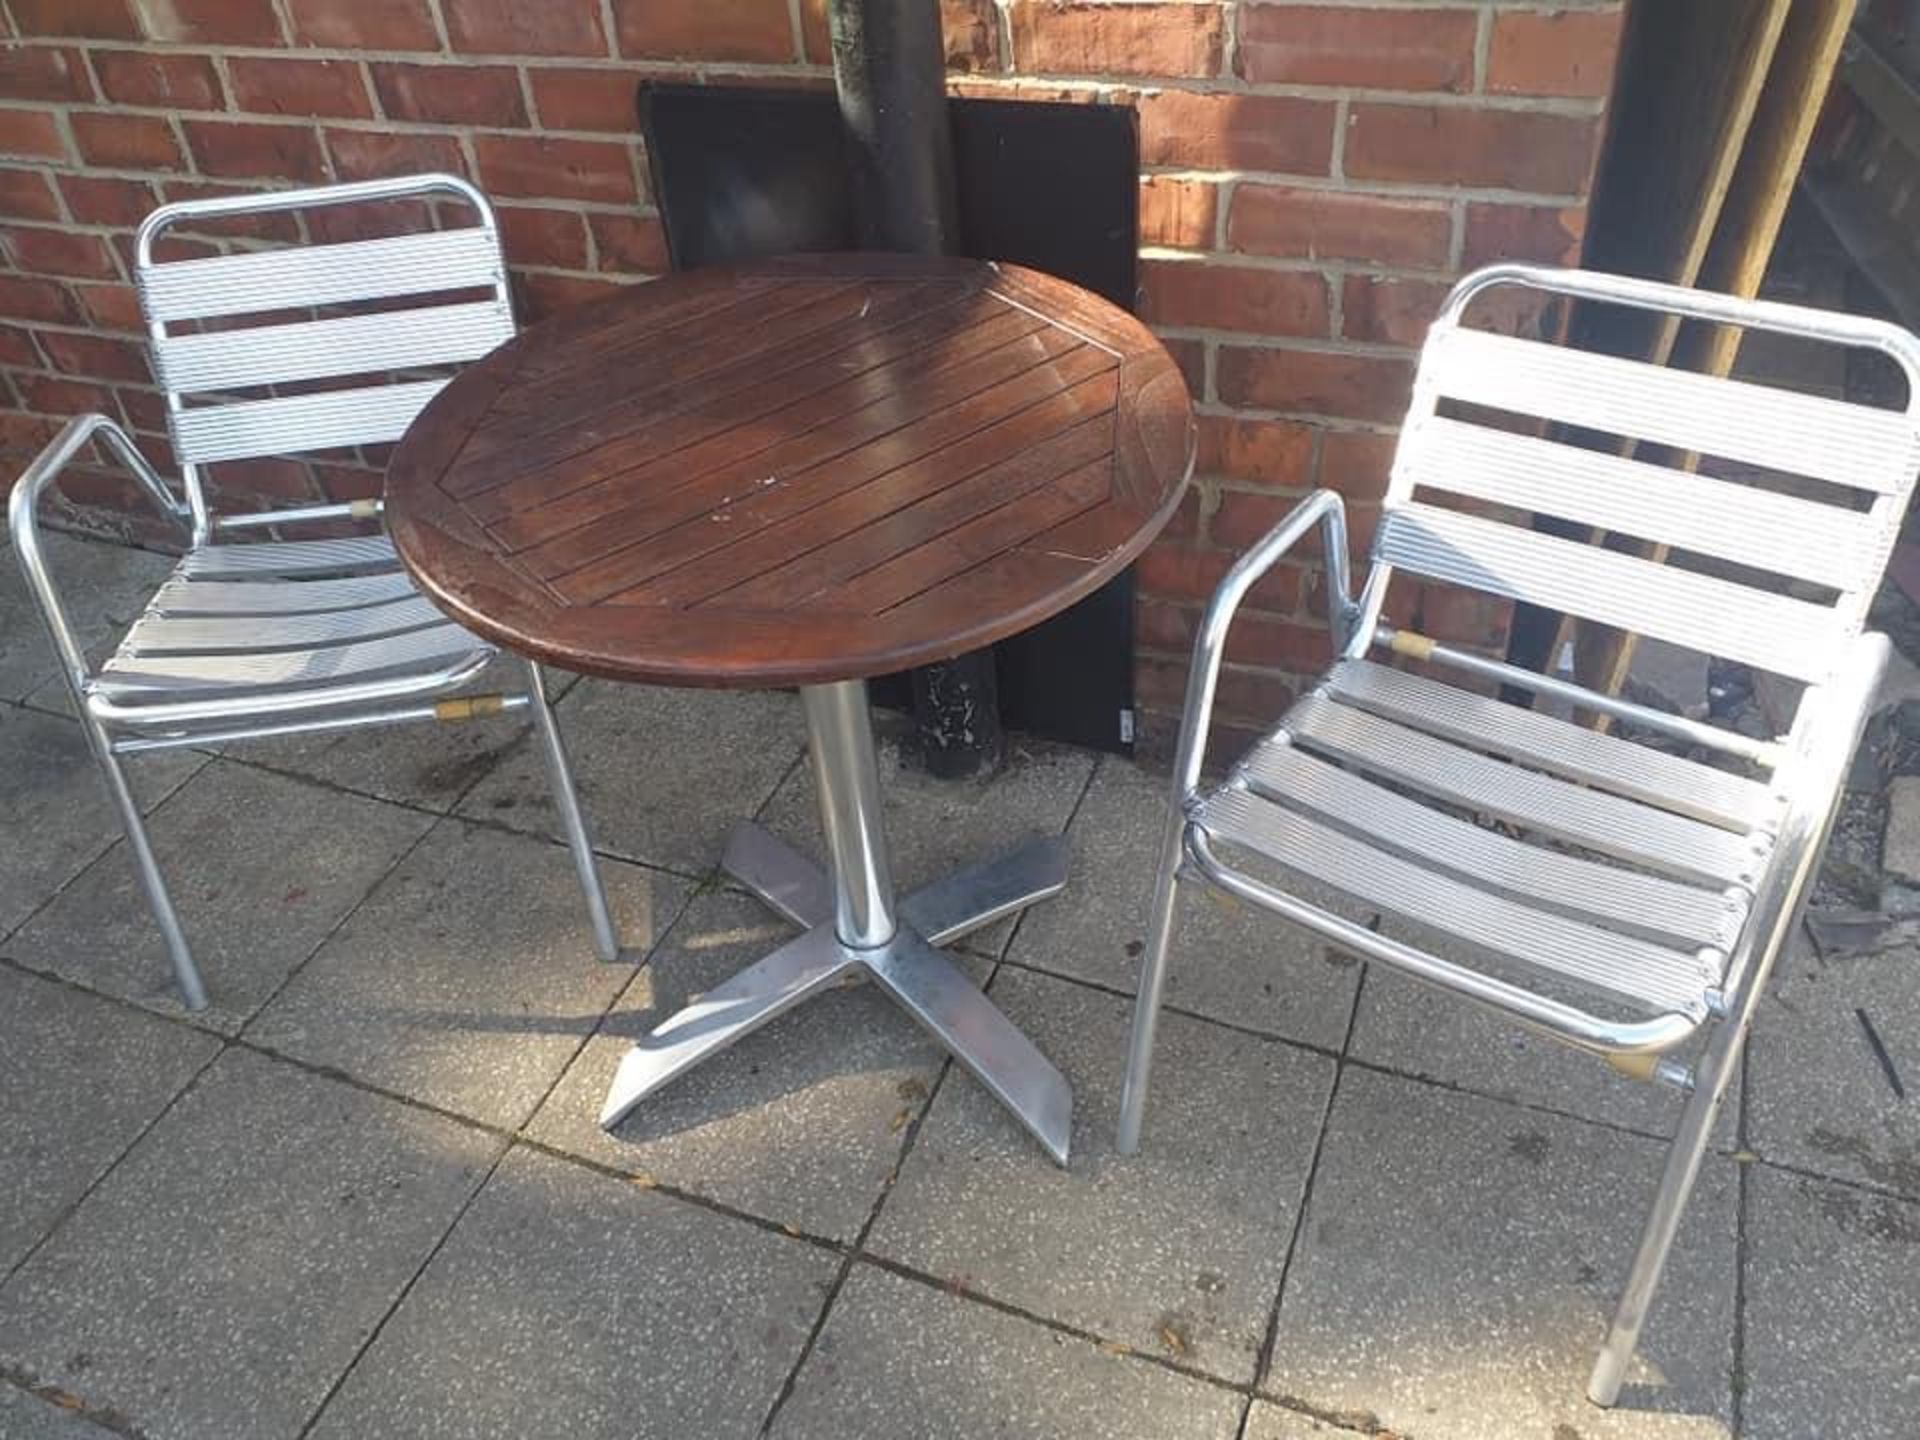 Aluminium staked chairs and folding table